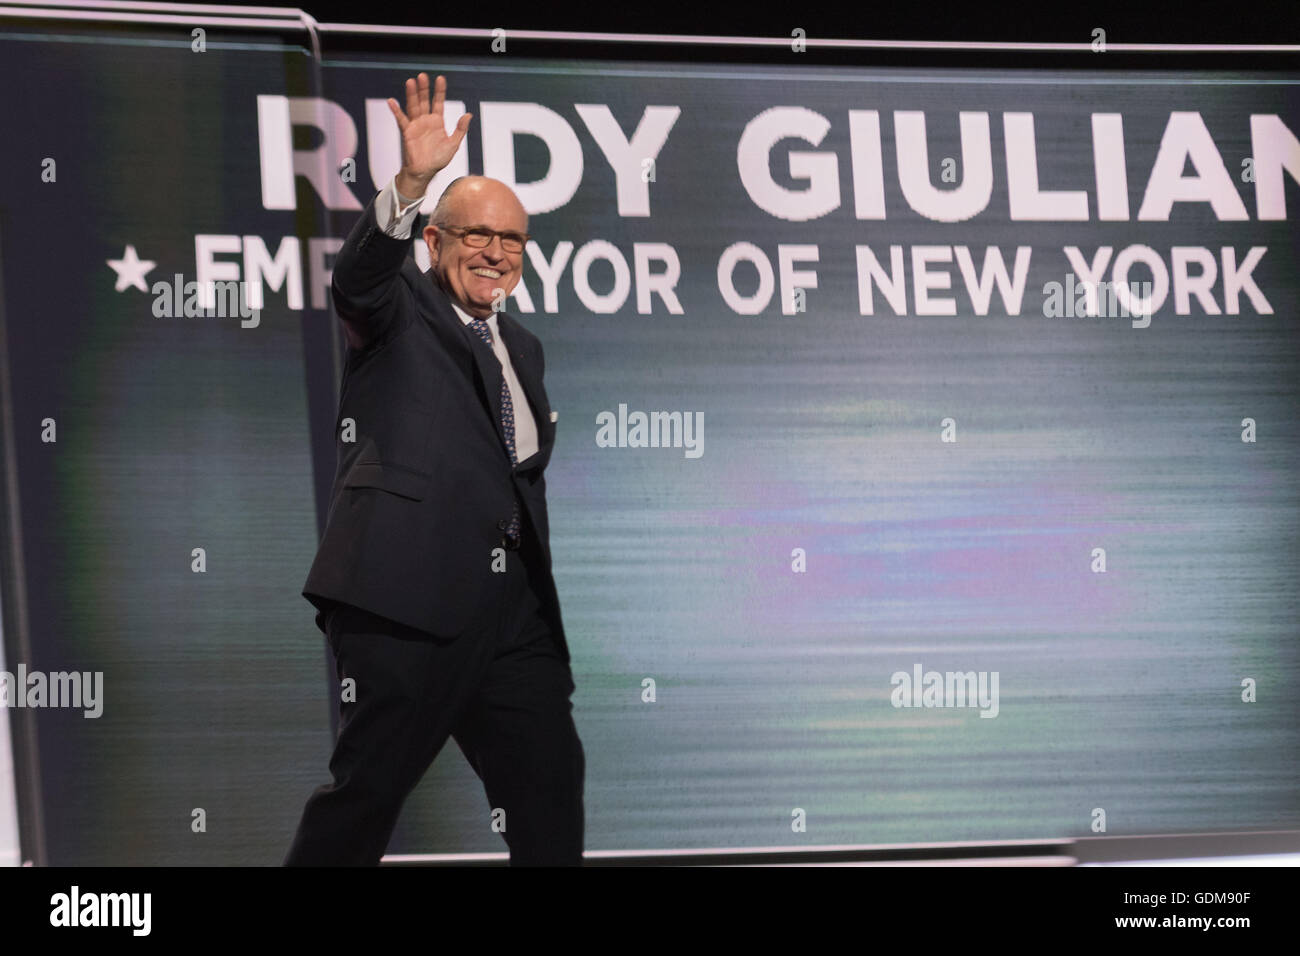 Cleveland, Ohio, USA. 18th July, 2016. Former New York Mayor Rudy Giuliani wavs as he walks on stage to speak during the first day of the Republican National Convention at the Quicken Loans Center July 18, 2016 in Cleveland, Ohio. Credit:  Planetpix/Alamy Live News Stock Photo